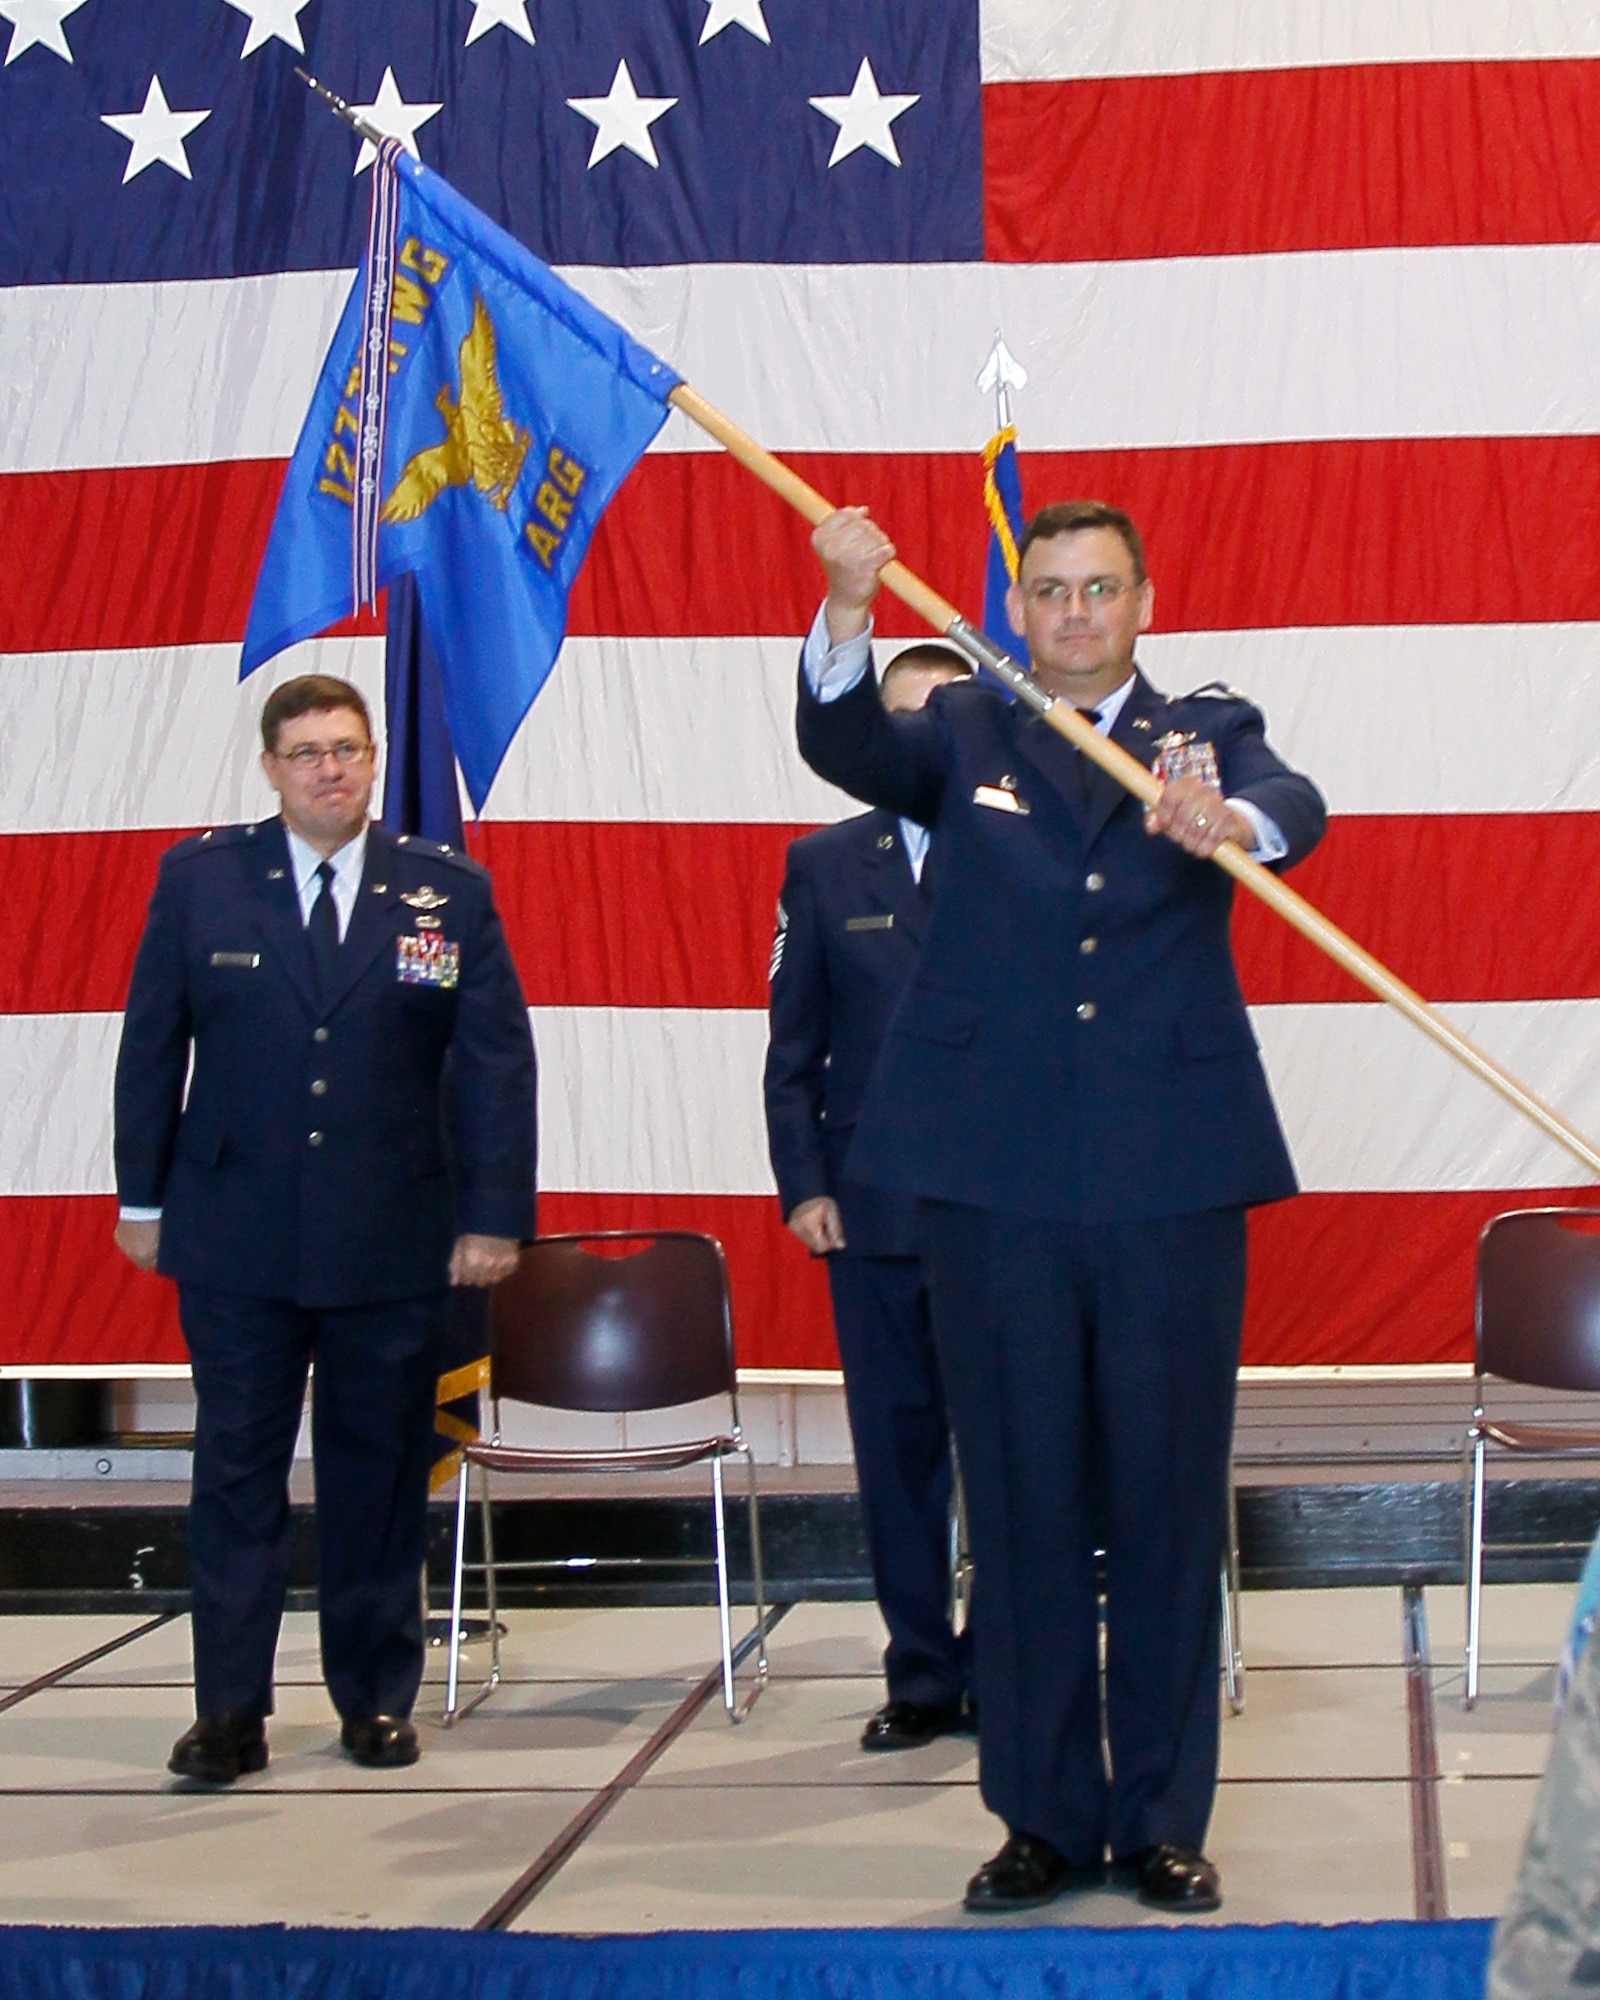 Lt. Col. David Brooks holds the flag representing the 127th Air Refueling Group as he assumes command of that group during a May 21, 2011, ceremony at Selfridge Air National Guard Base, Mich. Behind Brooks are Brig. Gen. Michael Peplinski, 127th Wing commander, and Senior Master Sgt. Michael Douglas. Brooks, a KC-135 Stratotanker pilot, had been serving as the commander of the 171st Air Refueling Squadron, a component of the 127th ARG. (USAF photo by MSgt. Terry Atwell)  (Released)